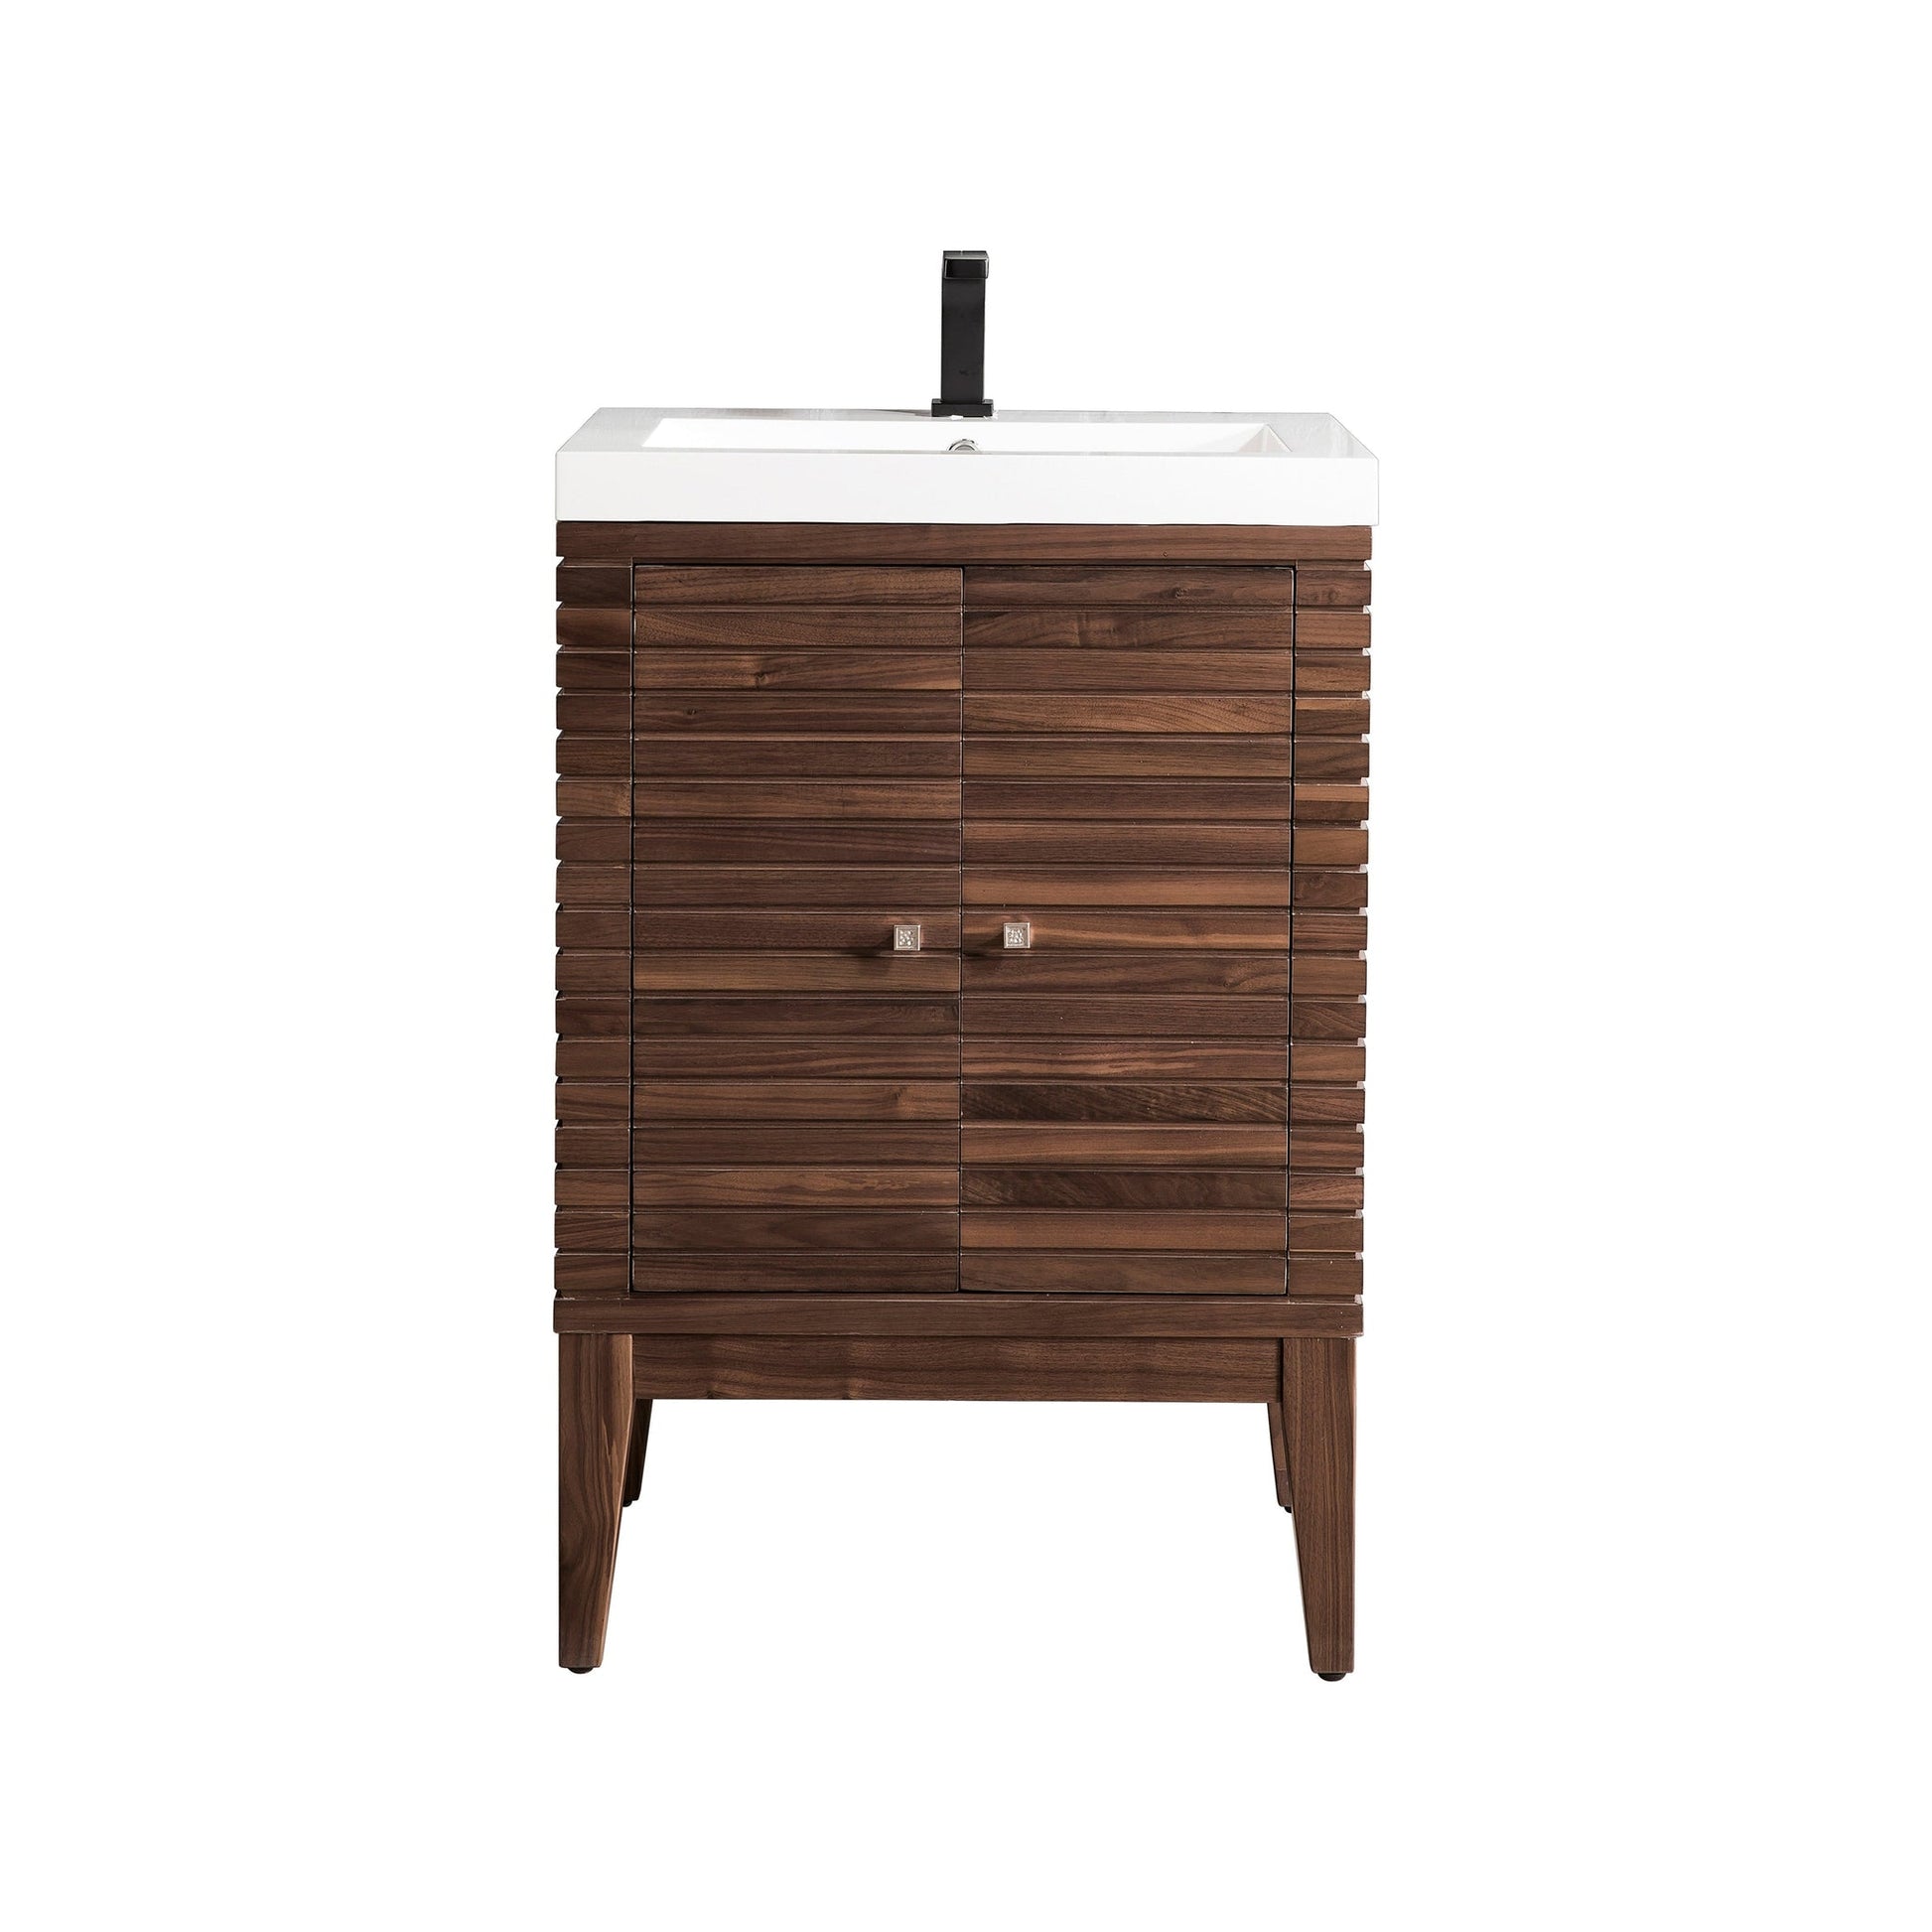 James Martin Vanities Linden 24" Whitewashed Walnut Single Vanity Cabinet With White Glossy Composite Countertop